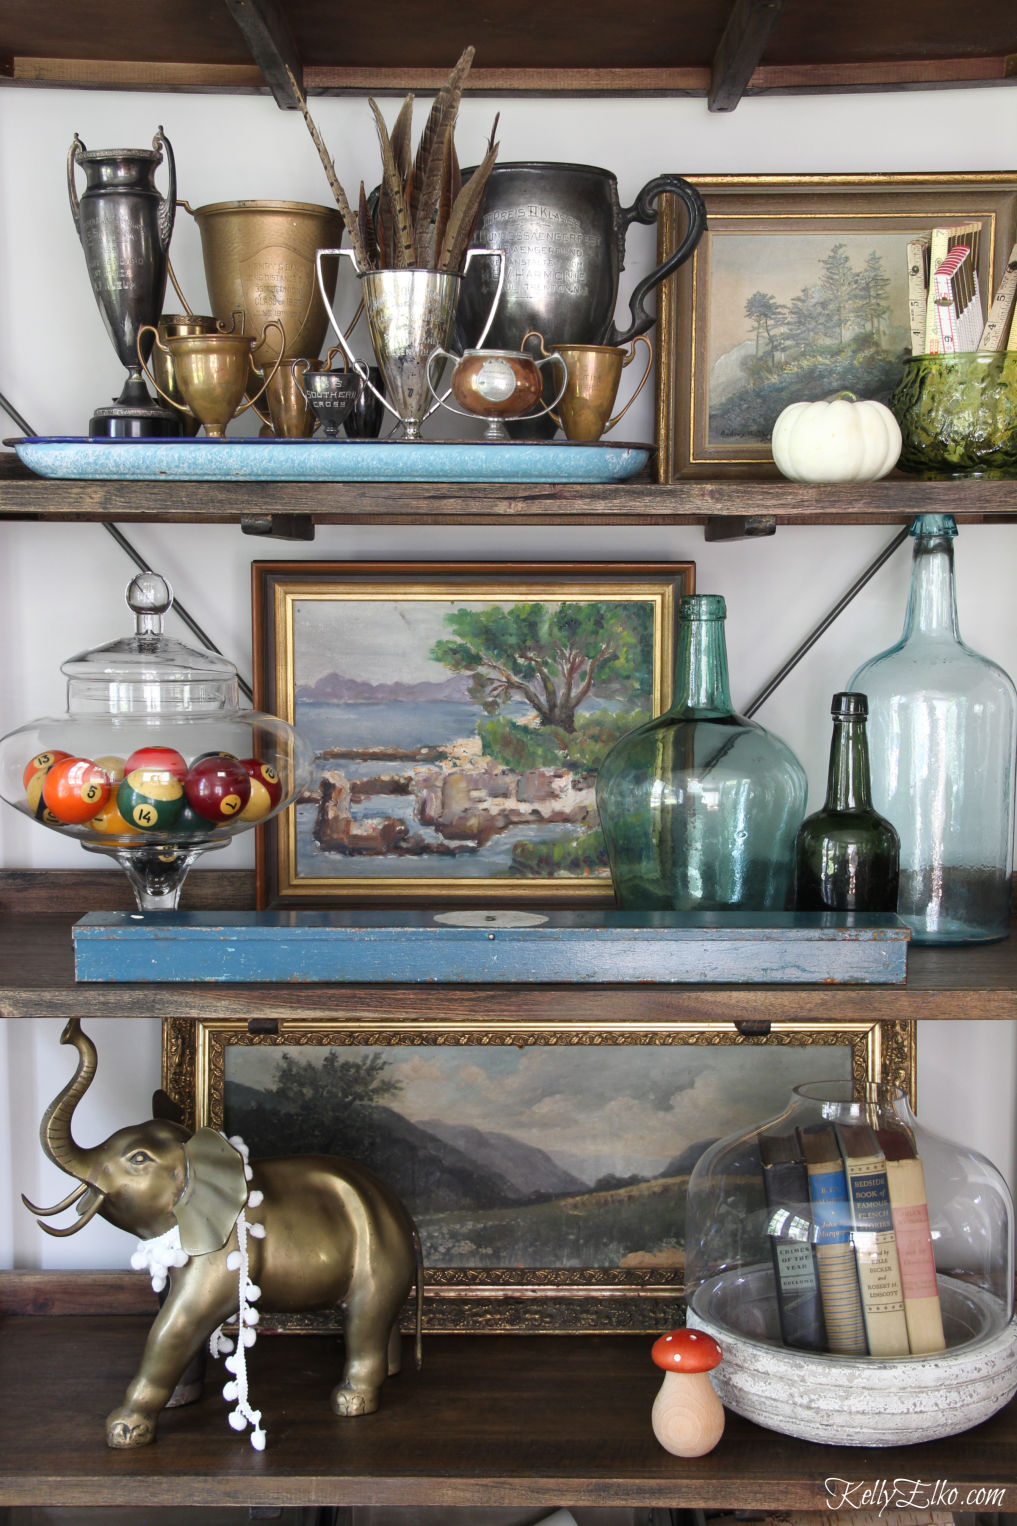 Love this shelf filled with an eclectic assortment of vintage finds including vintage loving cups, paintings and glass jars kellyelko.com #fall #falldecor #falldecorating #shelfstyling #vintagedecor #eclecticdecor #collections #homedecor